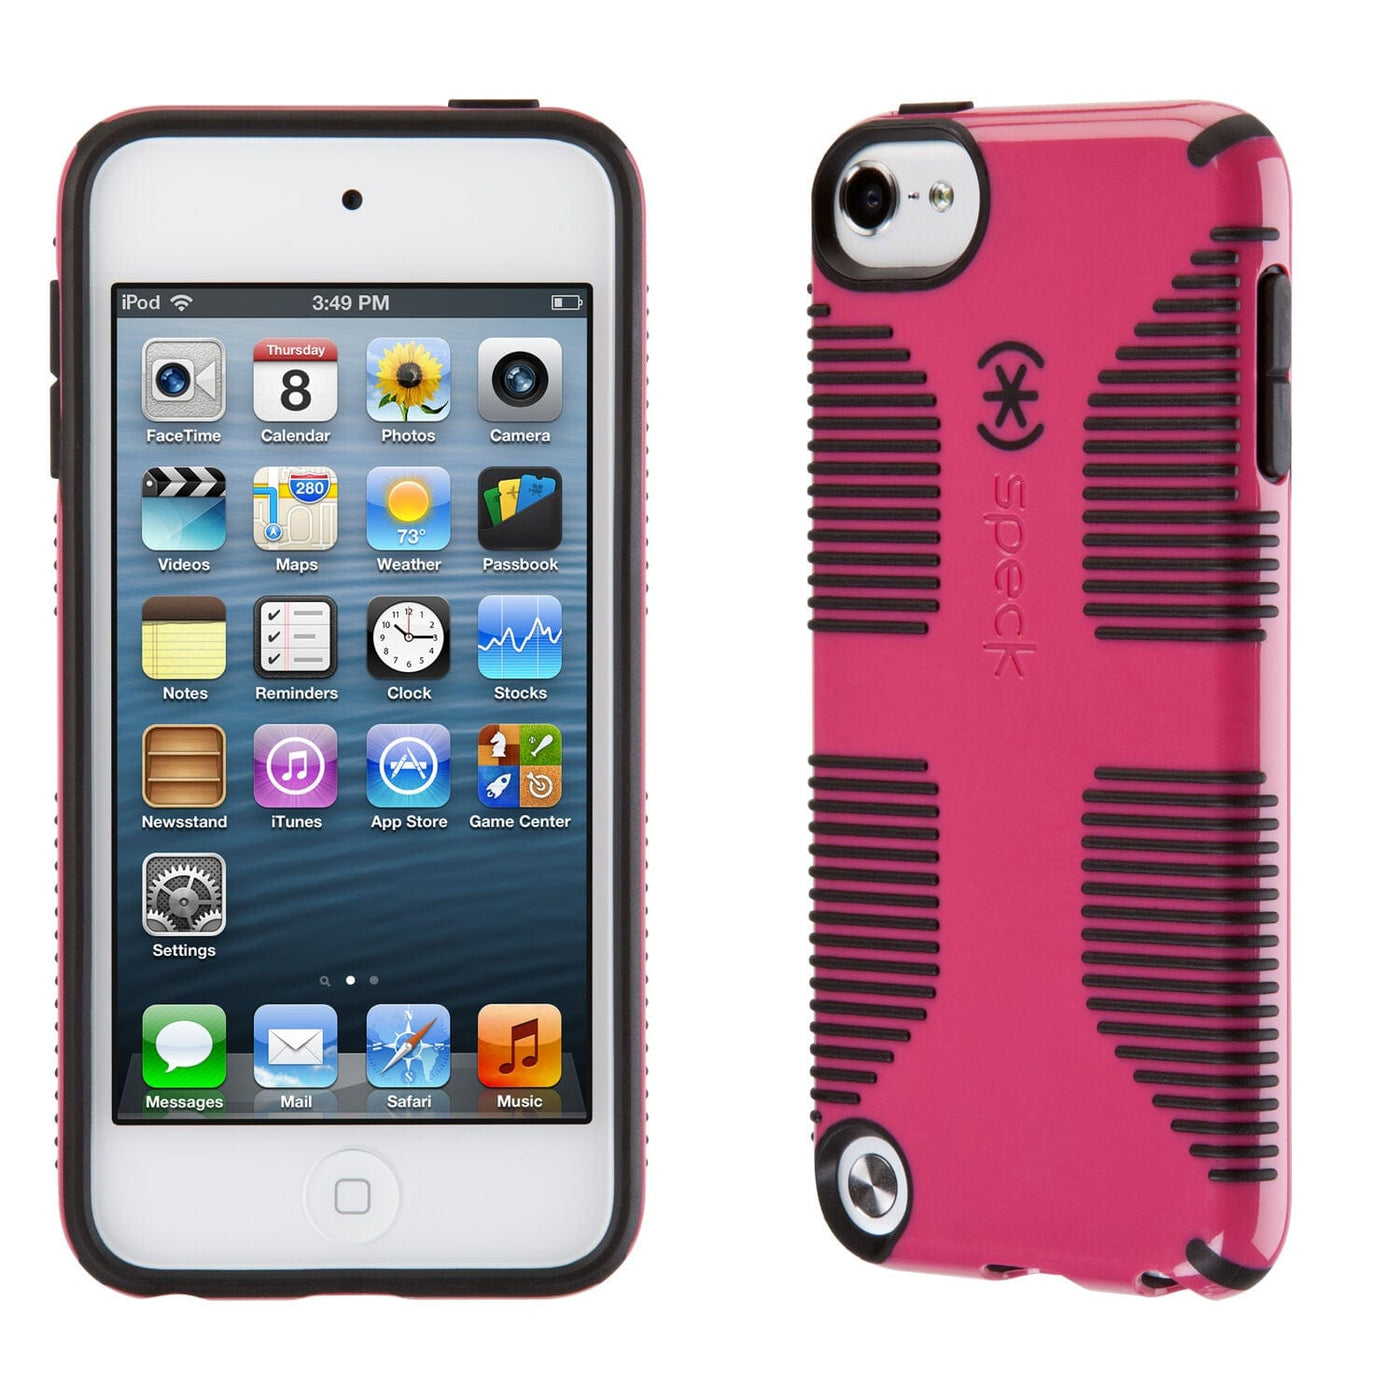 hongersnood maak een foto pleegouders Speck CandyShell Grip iPod Touch 6G & 5G Cases Best iPod Touch 6G & 5G -  $29.95